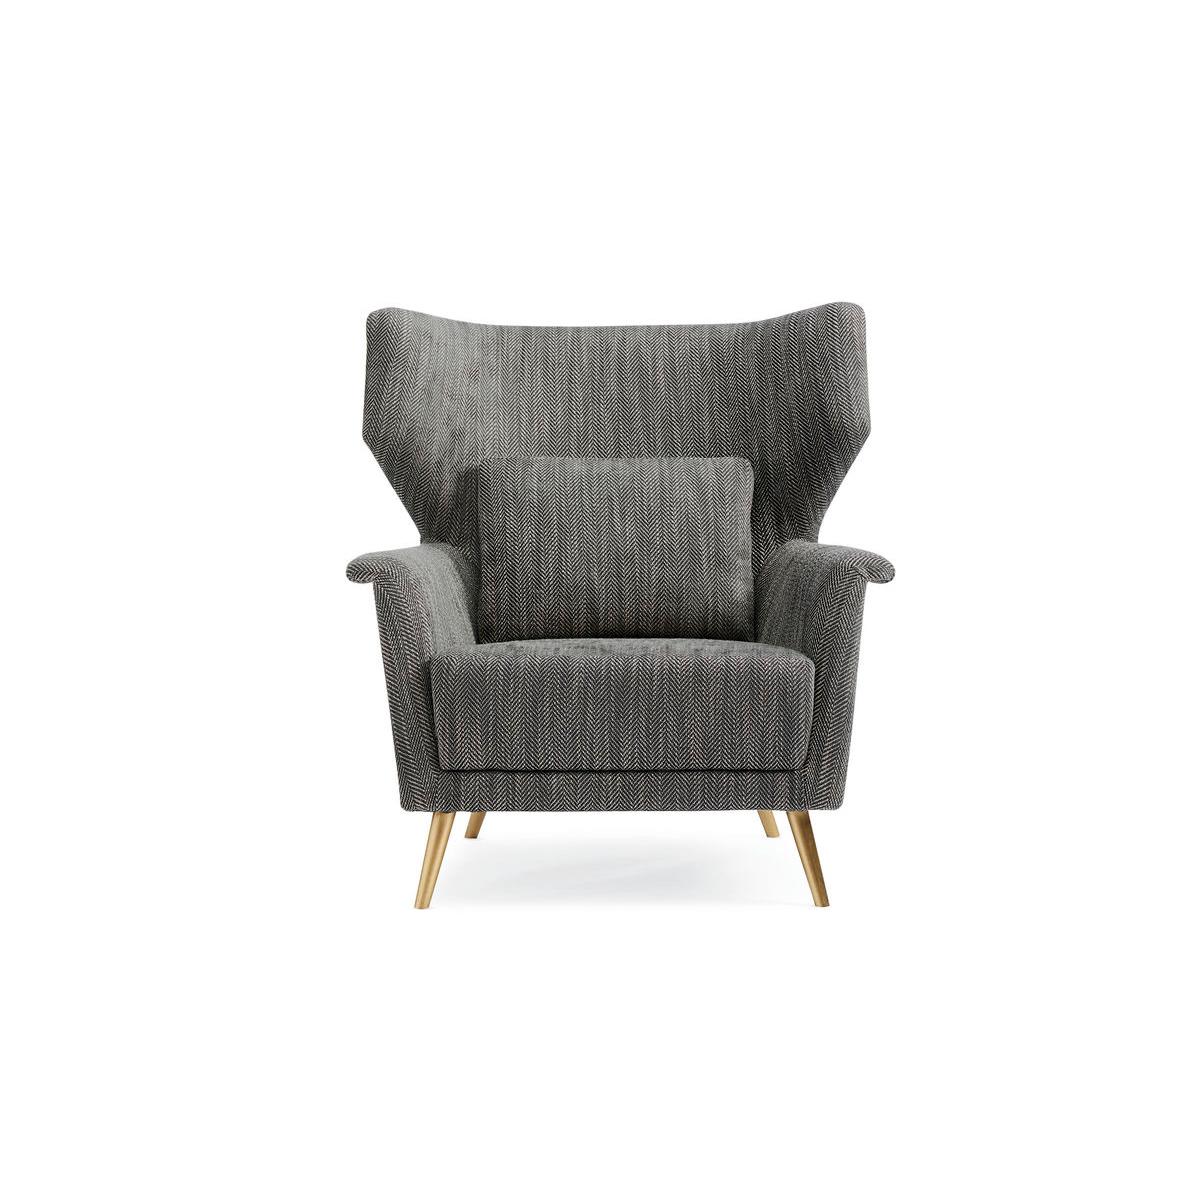 Mid century wing chair, drawing inspiration from the classic Klismos chair, this exaggerated wingback chair offers up a whimsical silhouette and iconic Mid-century Modern style. Pitched at just the right angle and positioned on conical, splayed